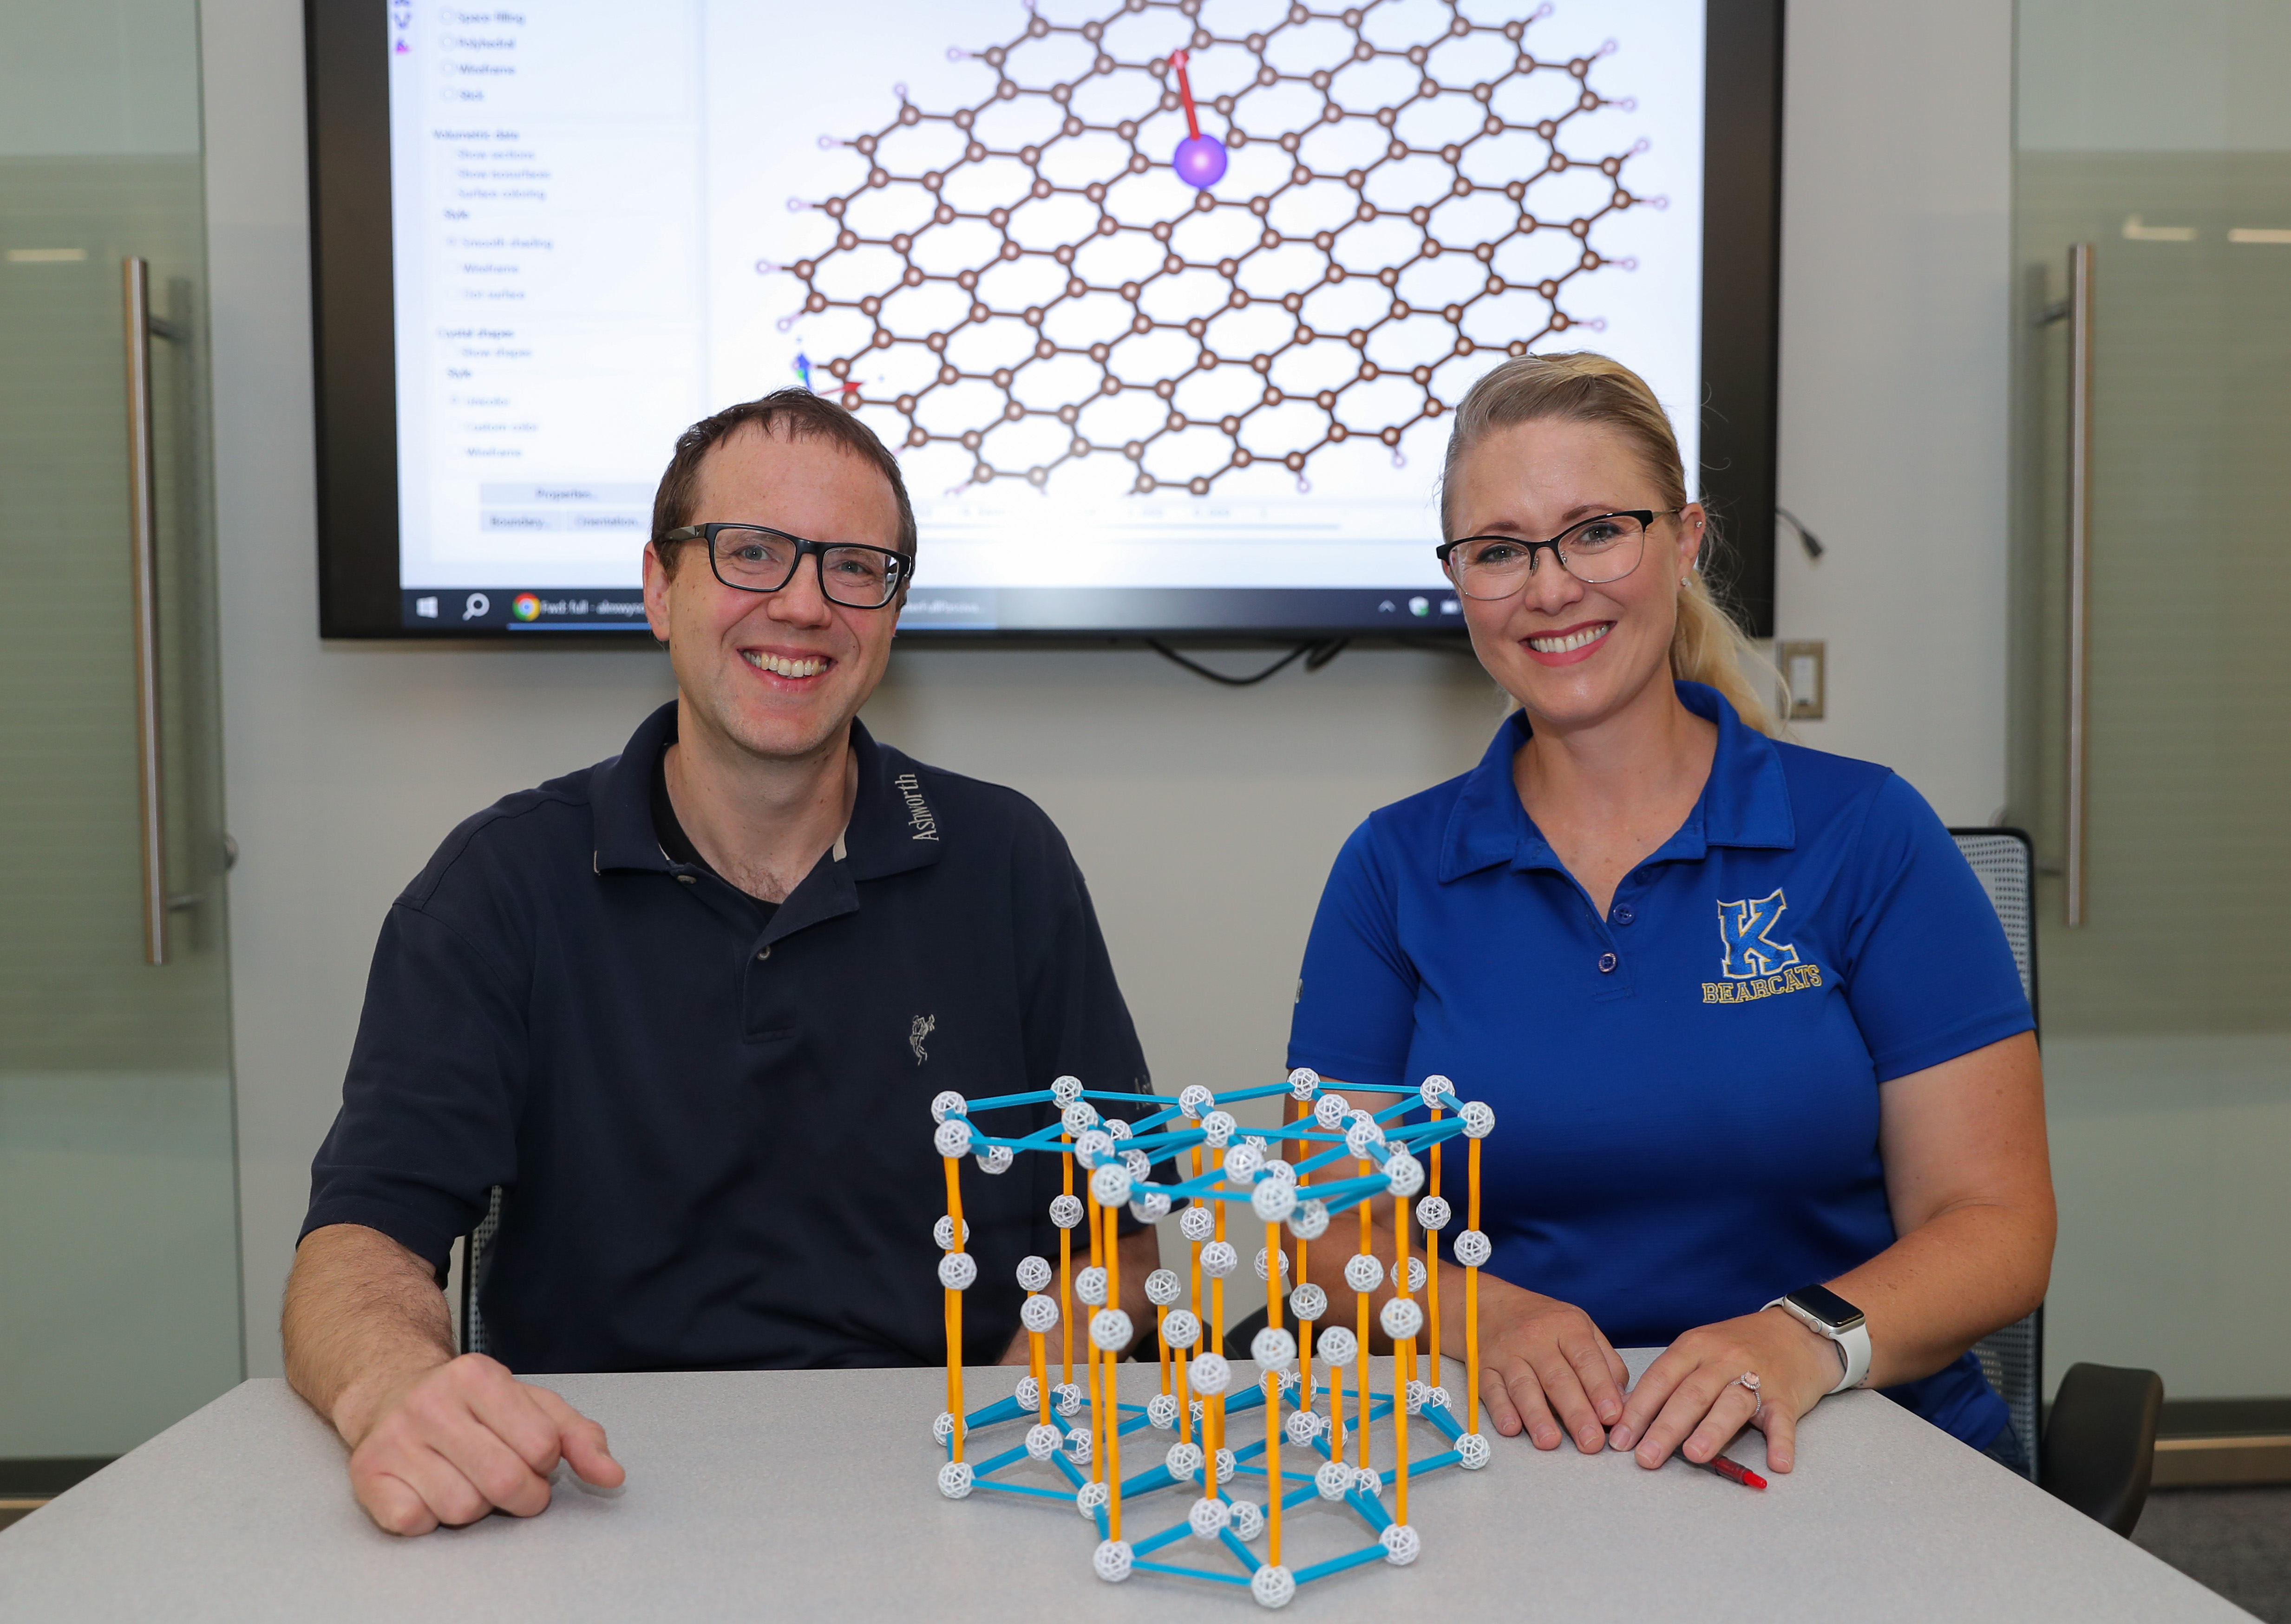 UNK Assistant Professor of Physics Alex Wysocki (left) and Kearney High School chemistry teacher Alison Klein collaborate on quantum materials in the summer of 2023 via an “RET” (Research Experience for Teachers) funded by the National Science Foundation via Nebraska EPSCoR.